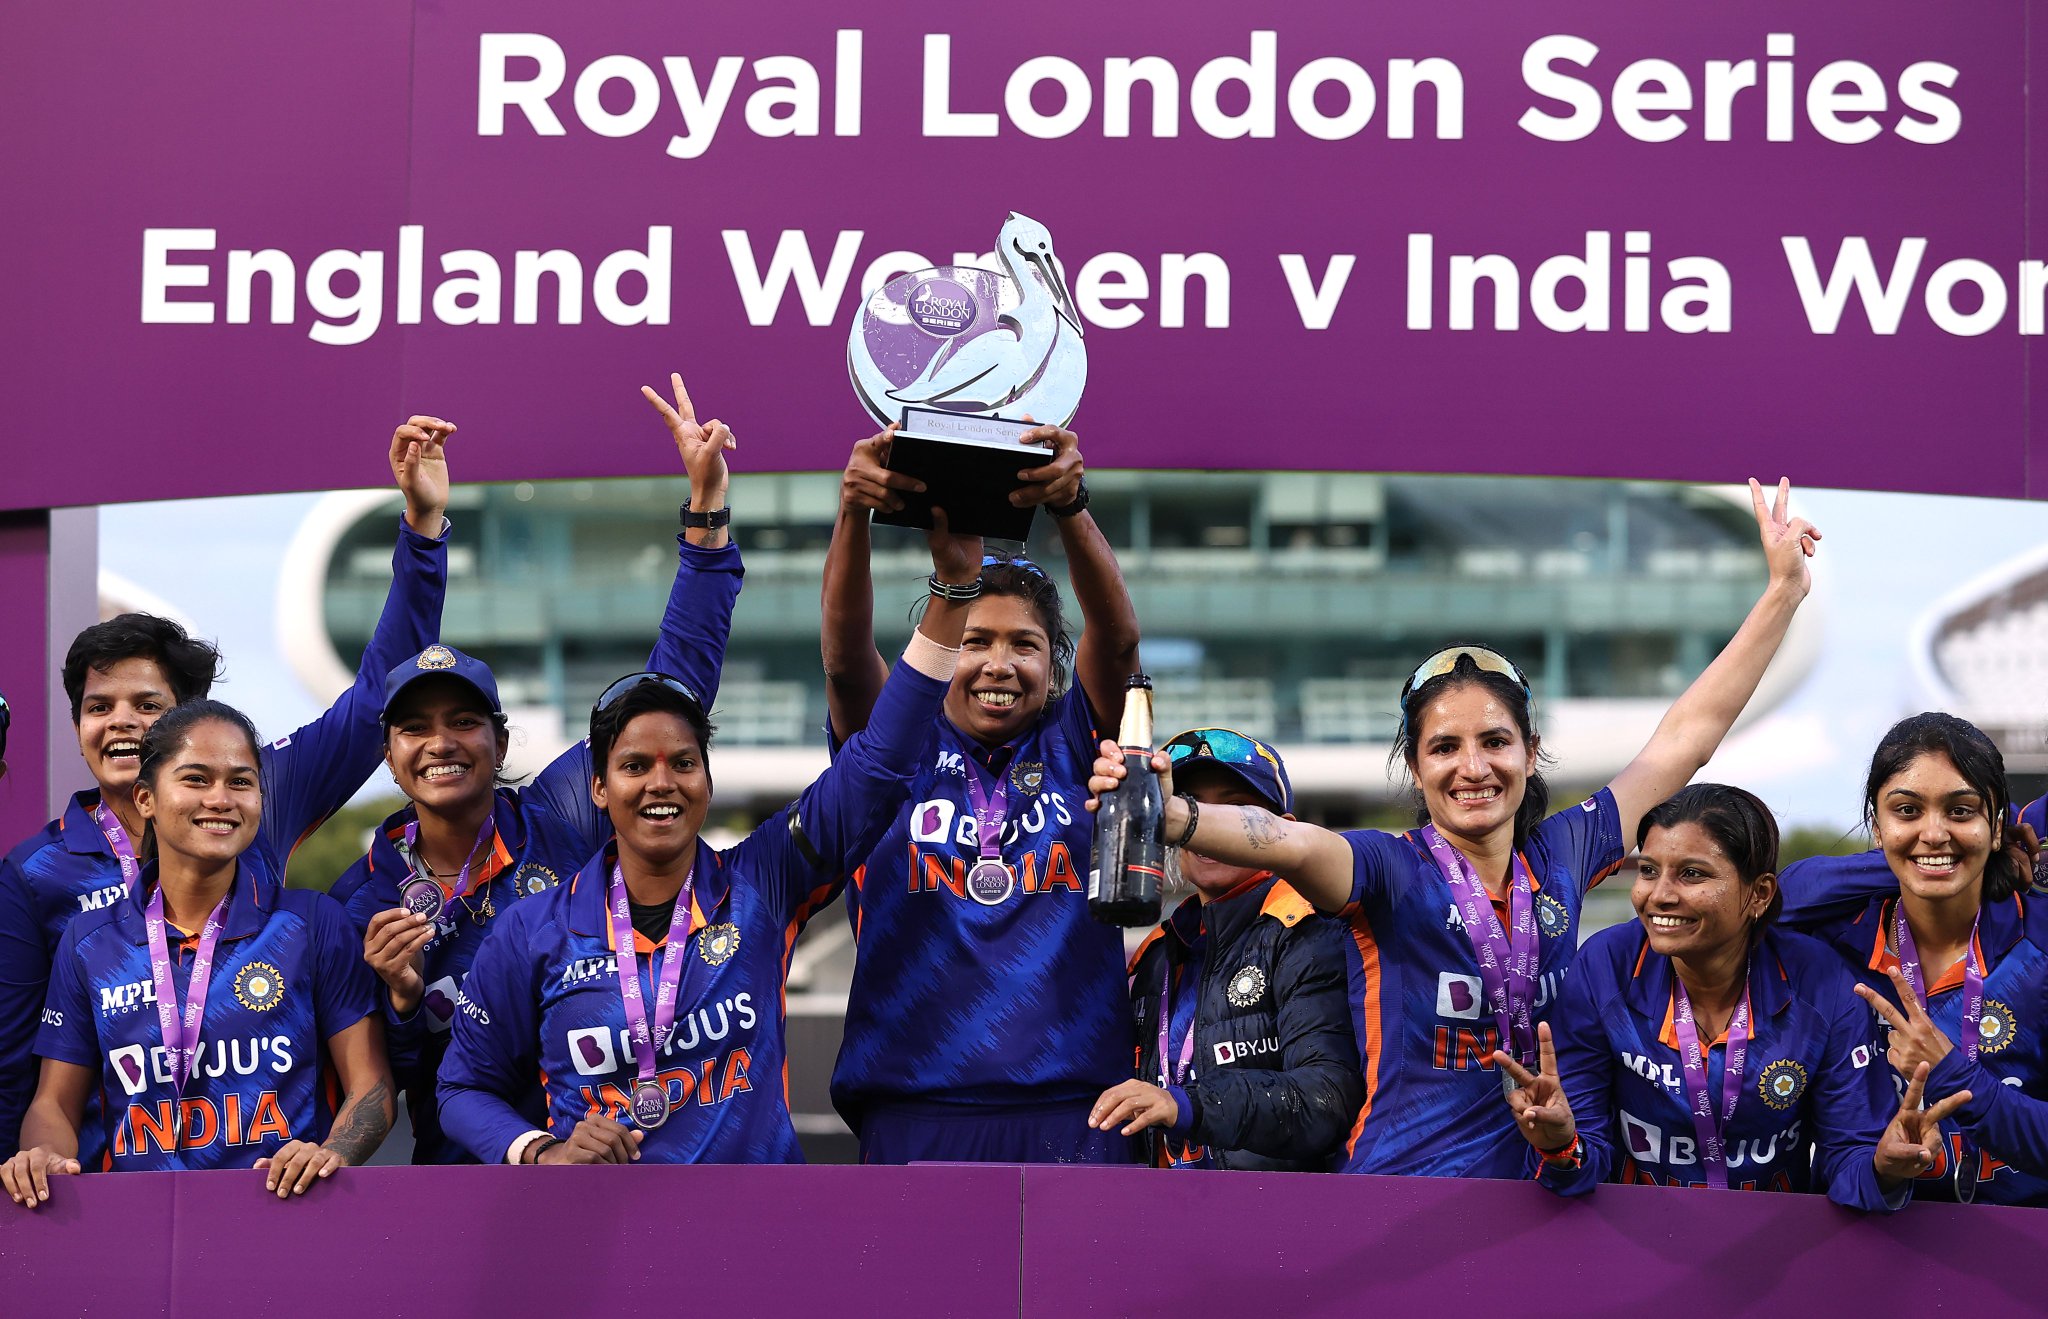 Jhulan Goswami lifts the trophy | Getty Images 